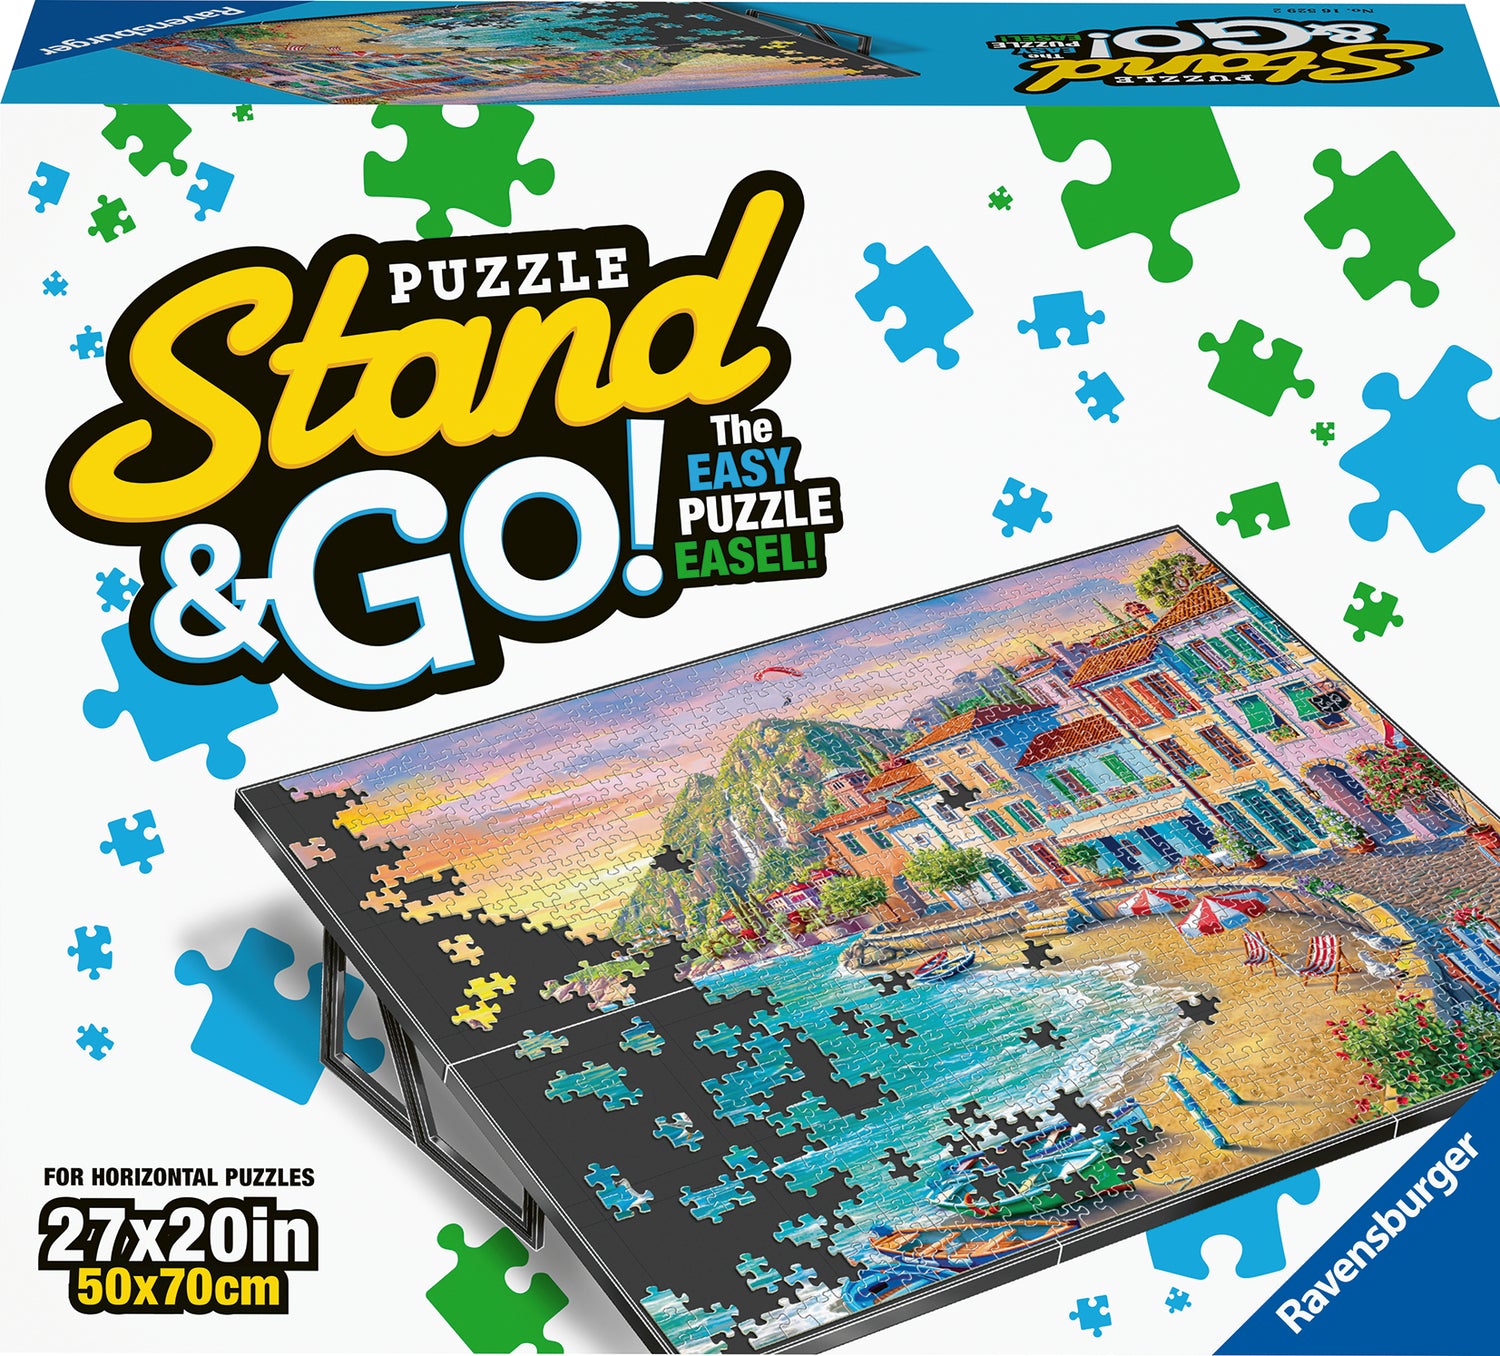 Puzzle Stand & Go!